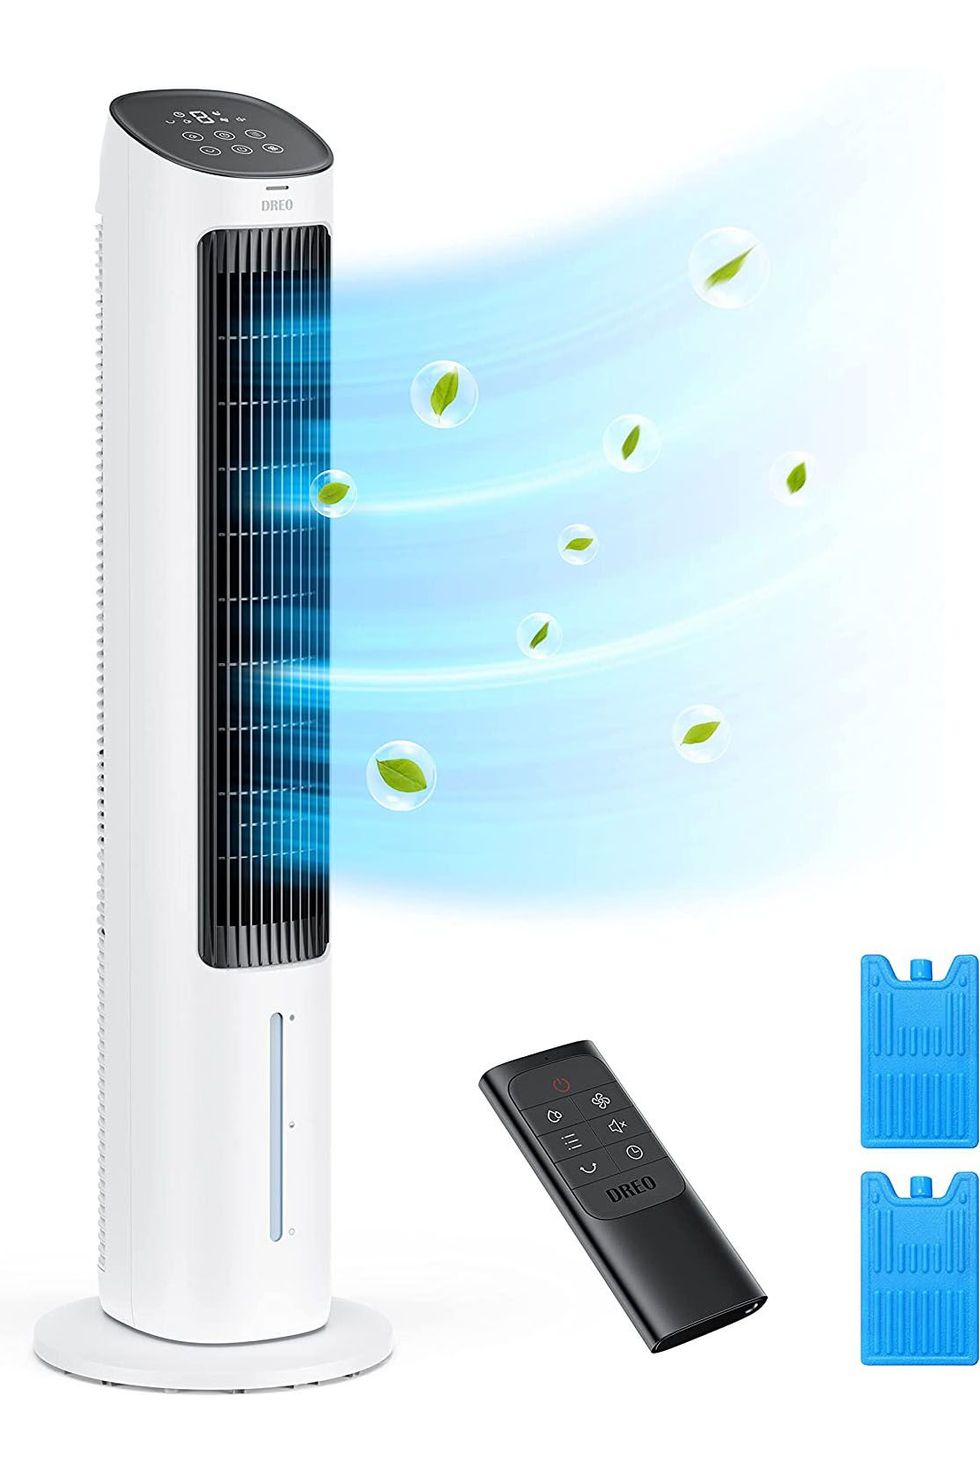 https://hips.hearstapps.com/vader-prod.s3.amazonaws.com/1648564175-best-cooling-fans-dreo-cooler-1648564151.jpg?crop=0.732xw:1.00xh;0.0401xw,0&resize=980:*